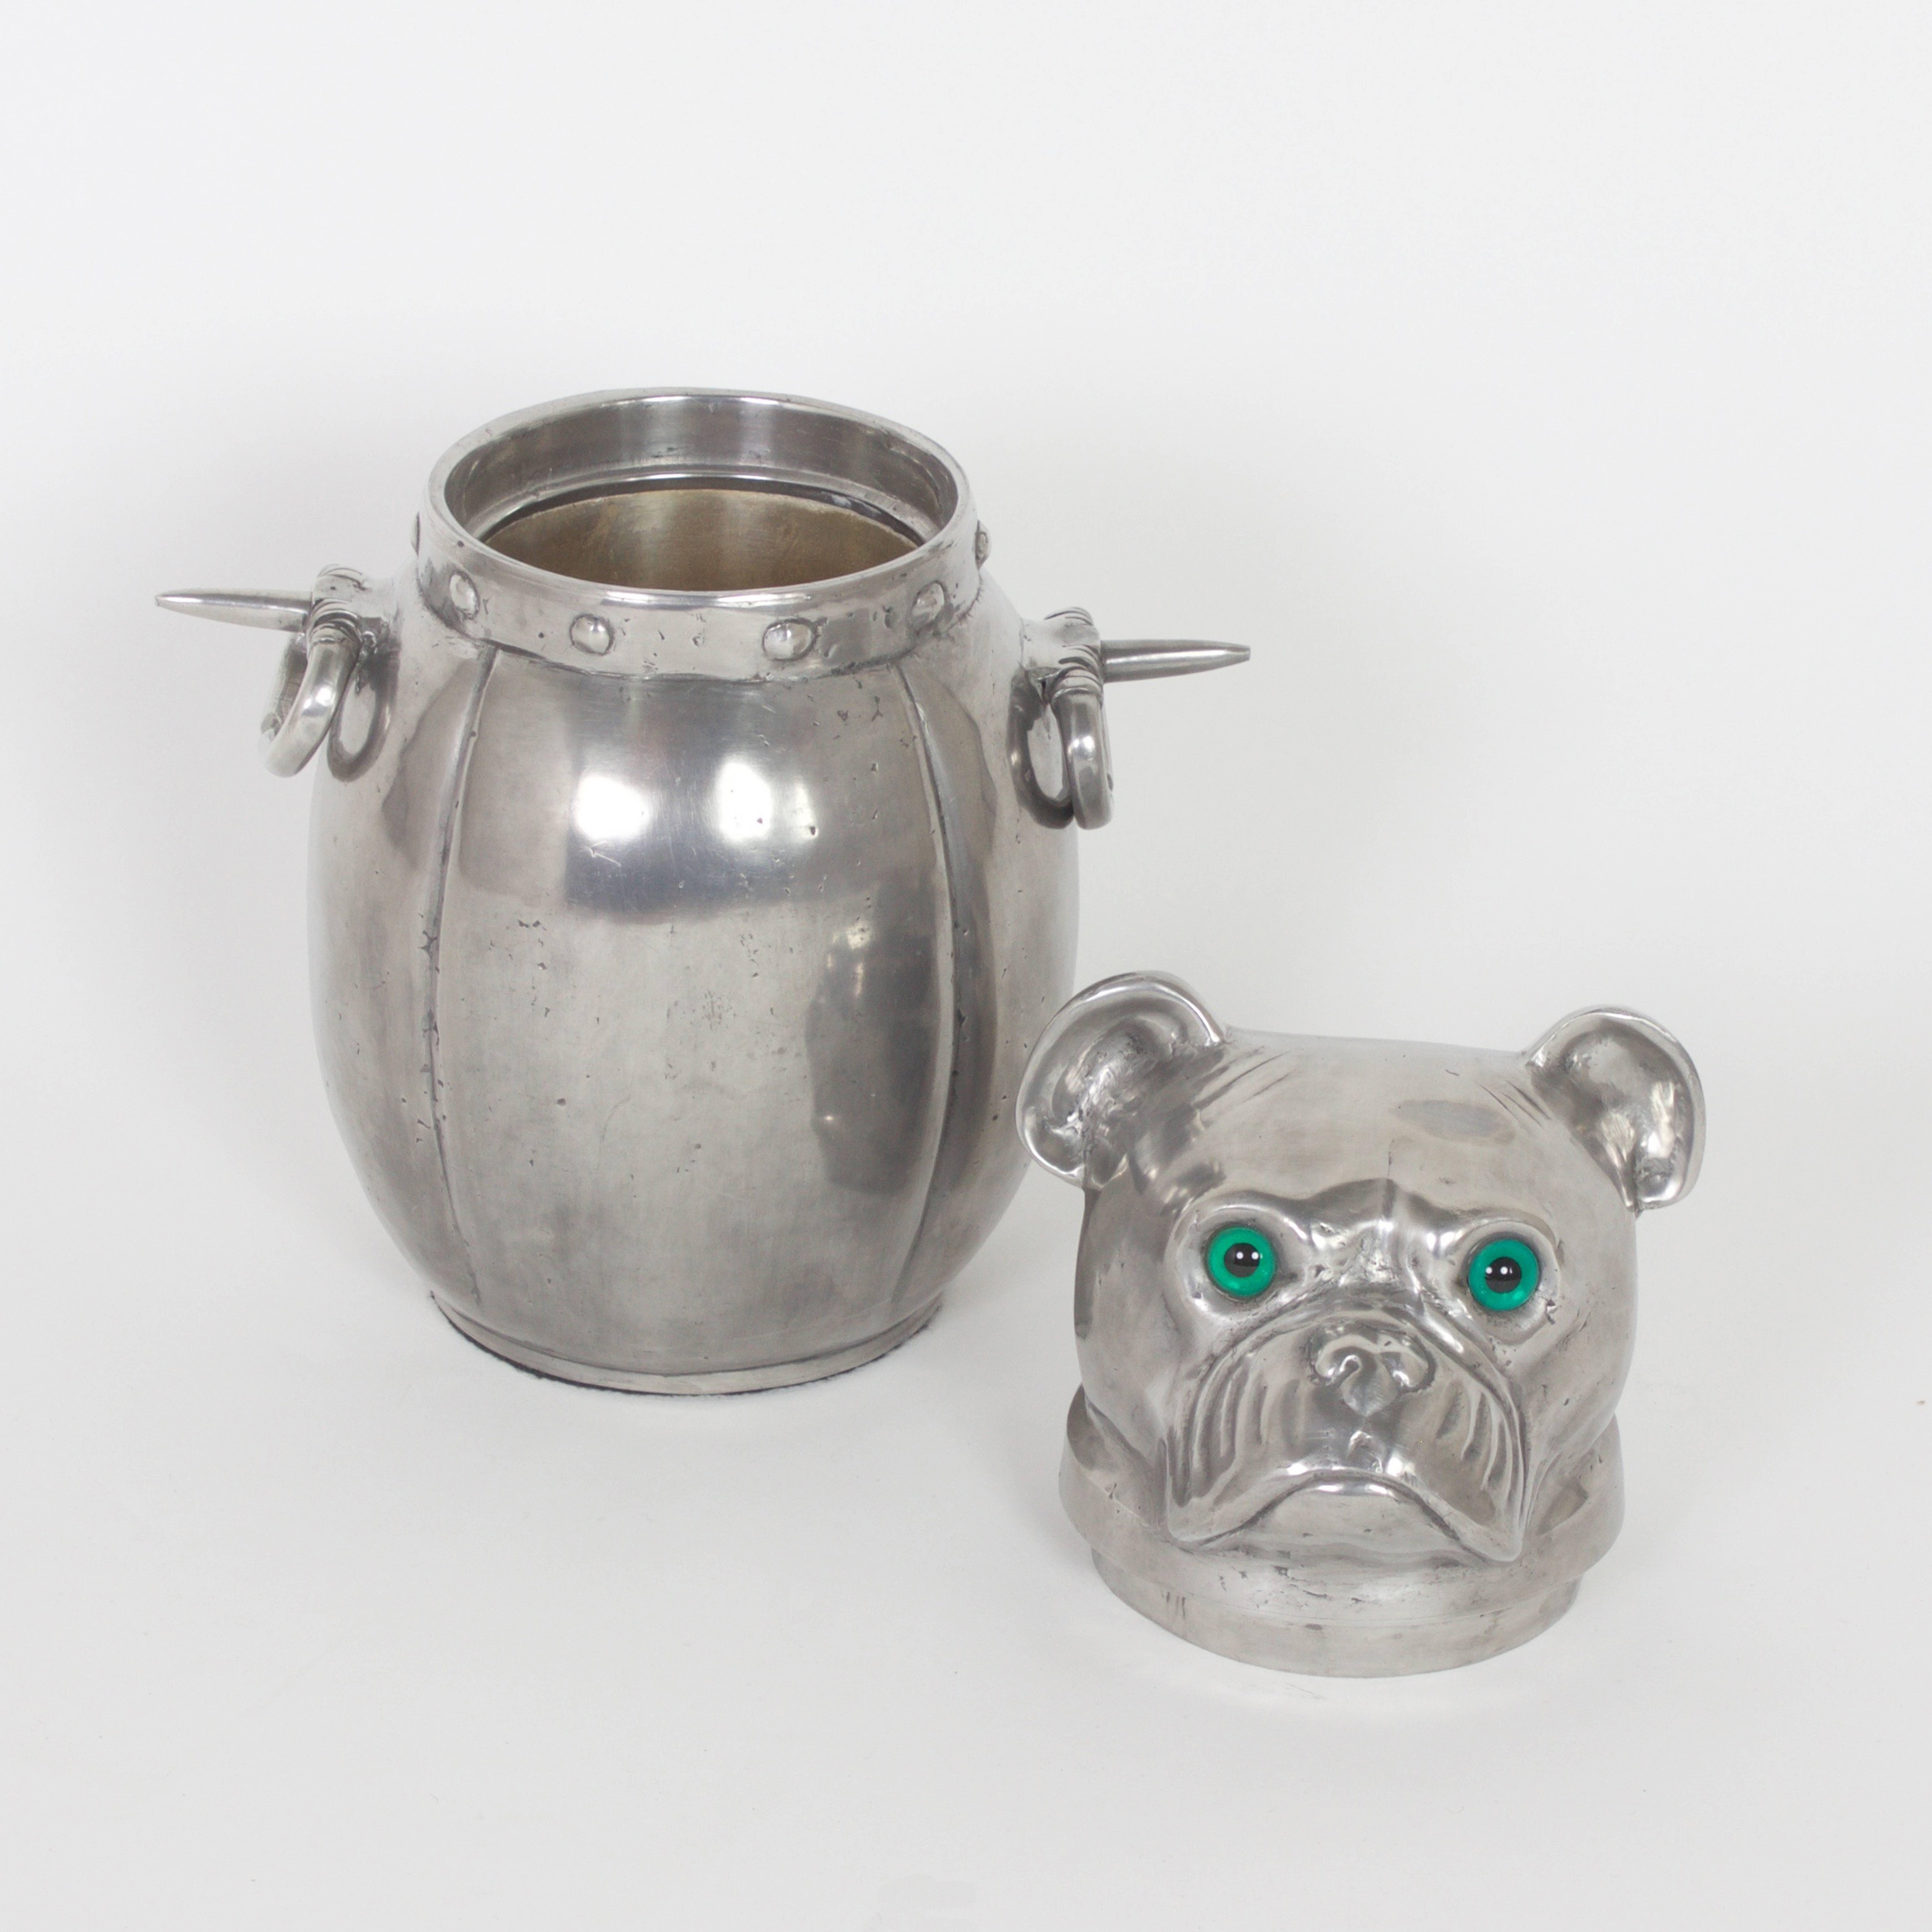 Handcrafted Mid-Century pewter ice bucket in the shape of a pug. This dog is decked out with striking green glass eyes and "tuff guy" spikes and studded collar. Signed "Fecit Made in Portugal" with hallmarks on the bottom.

.